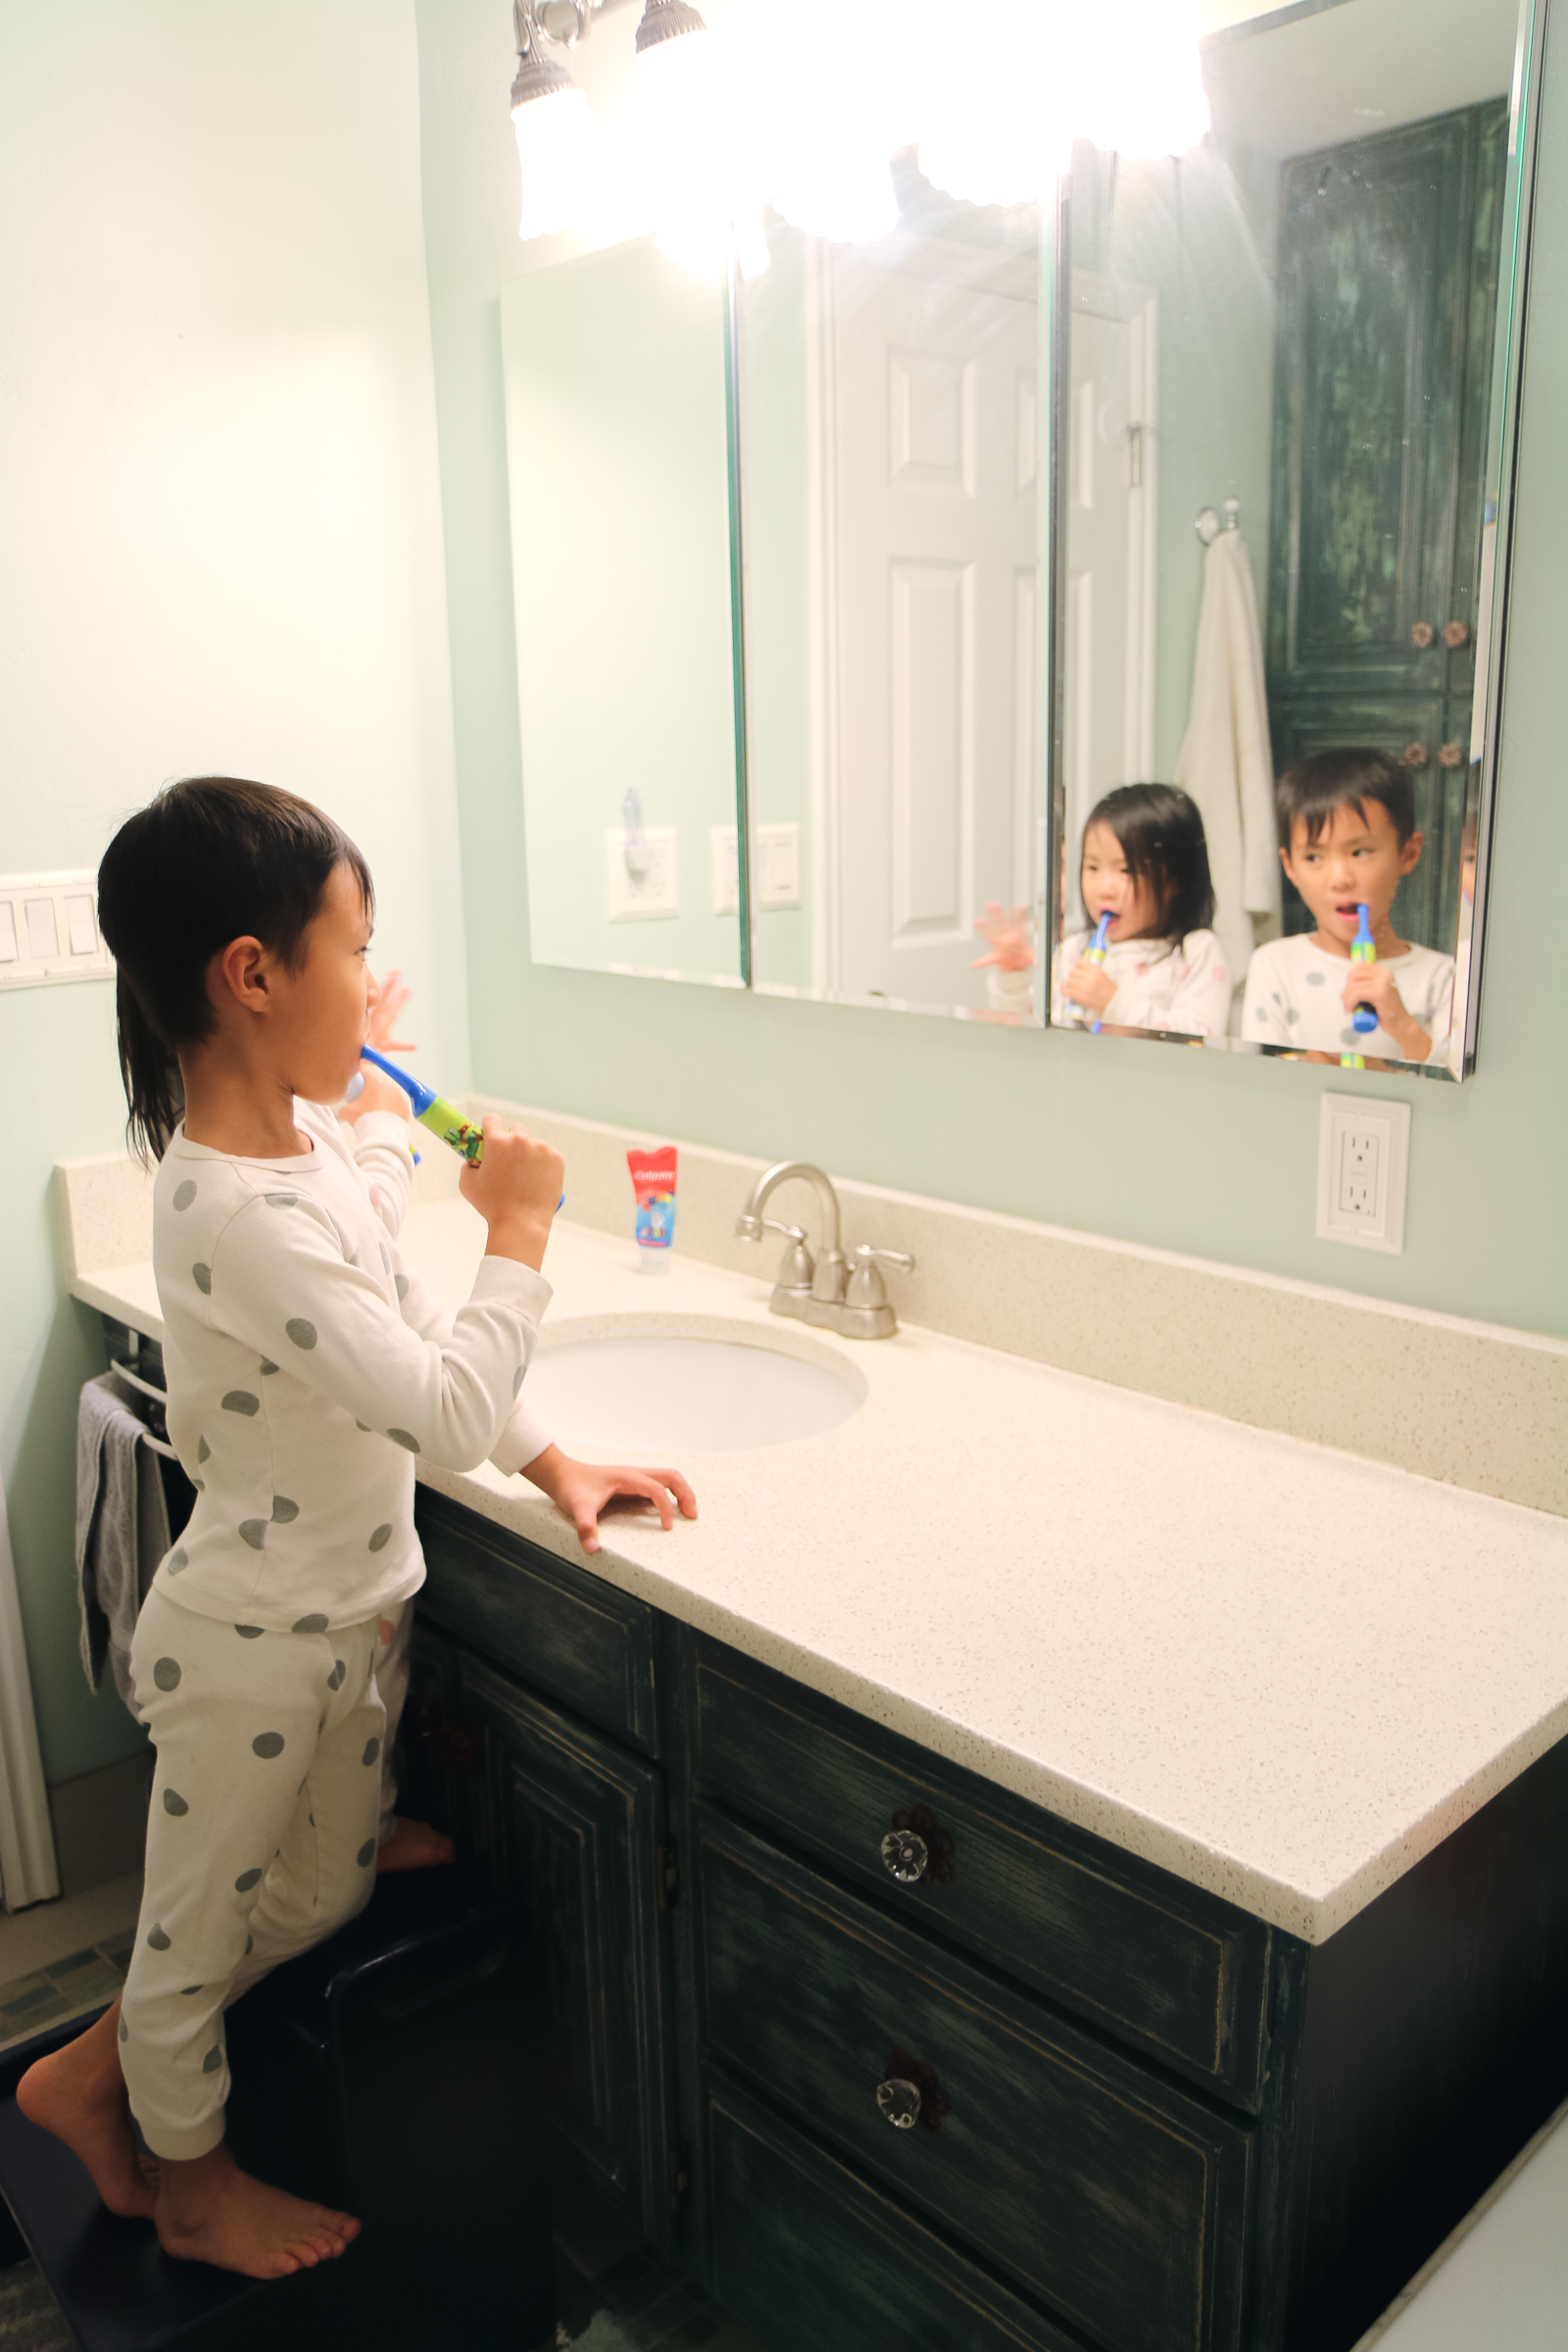 Child Brushing Teeth: How I Got My Kids To Brush Their Teeth For Two Whole Minutes by Utah lifestyle blogger Sandy A La Mode